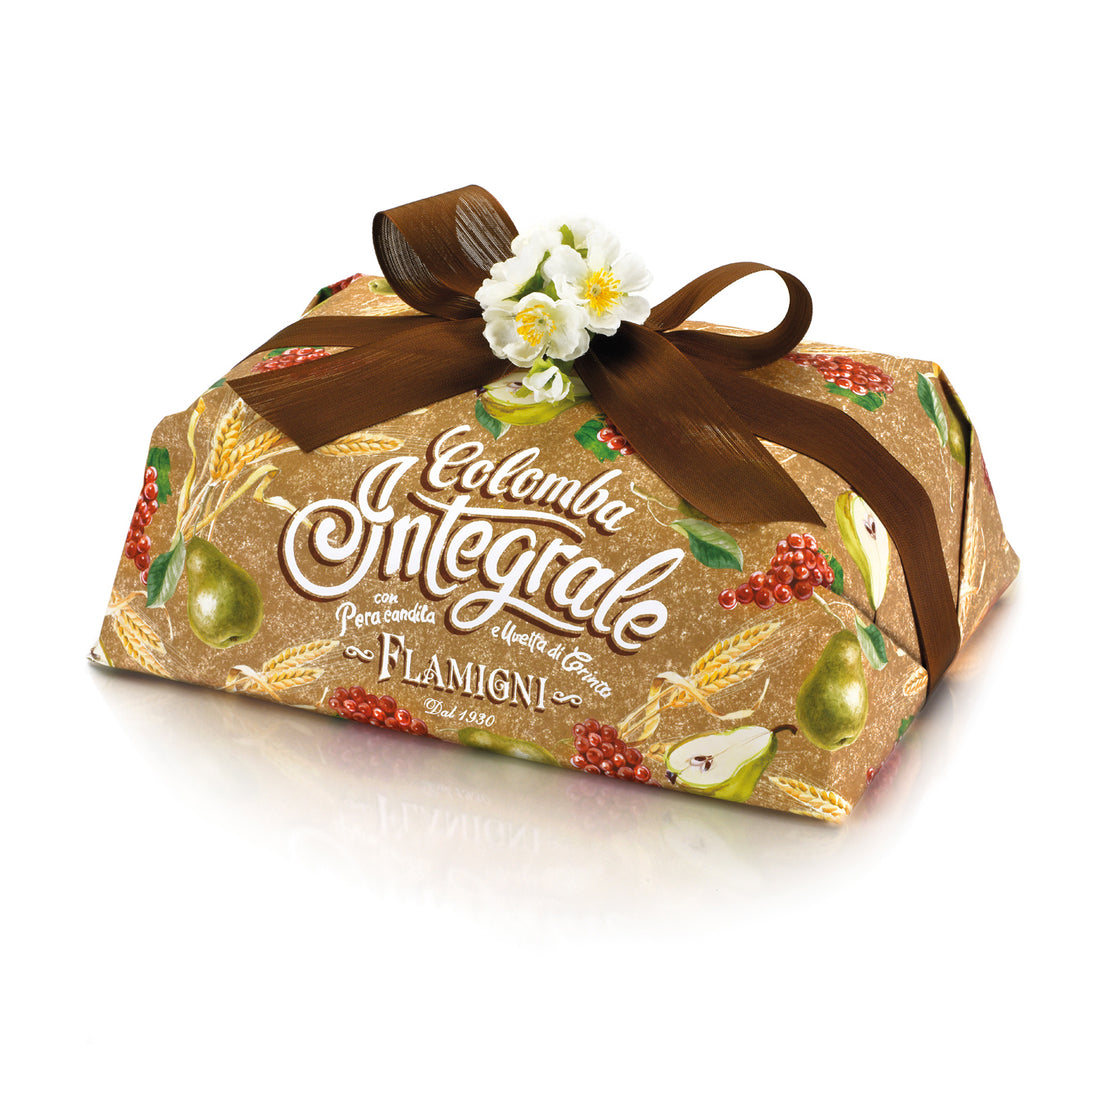 The Wholemeal Colomba